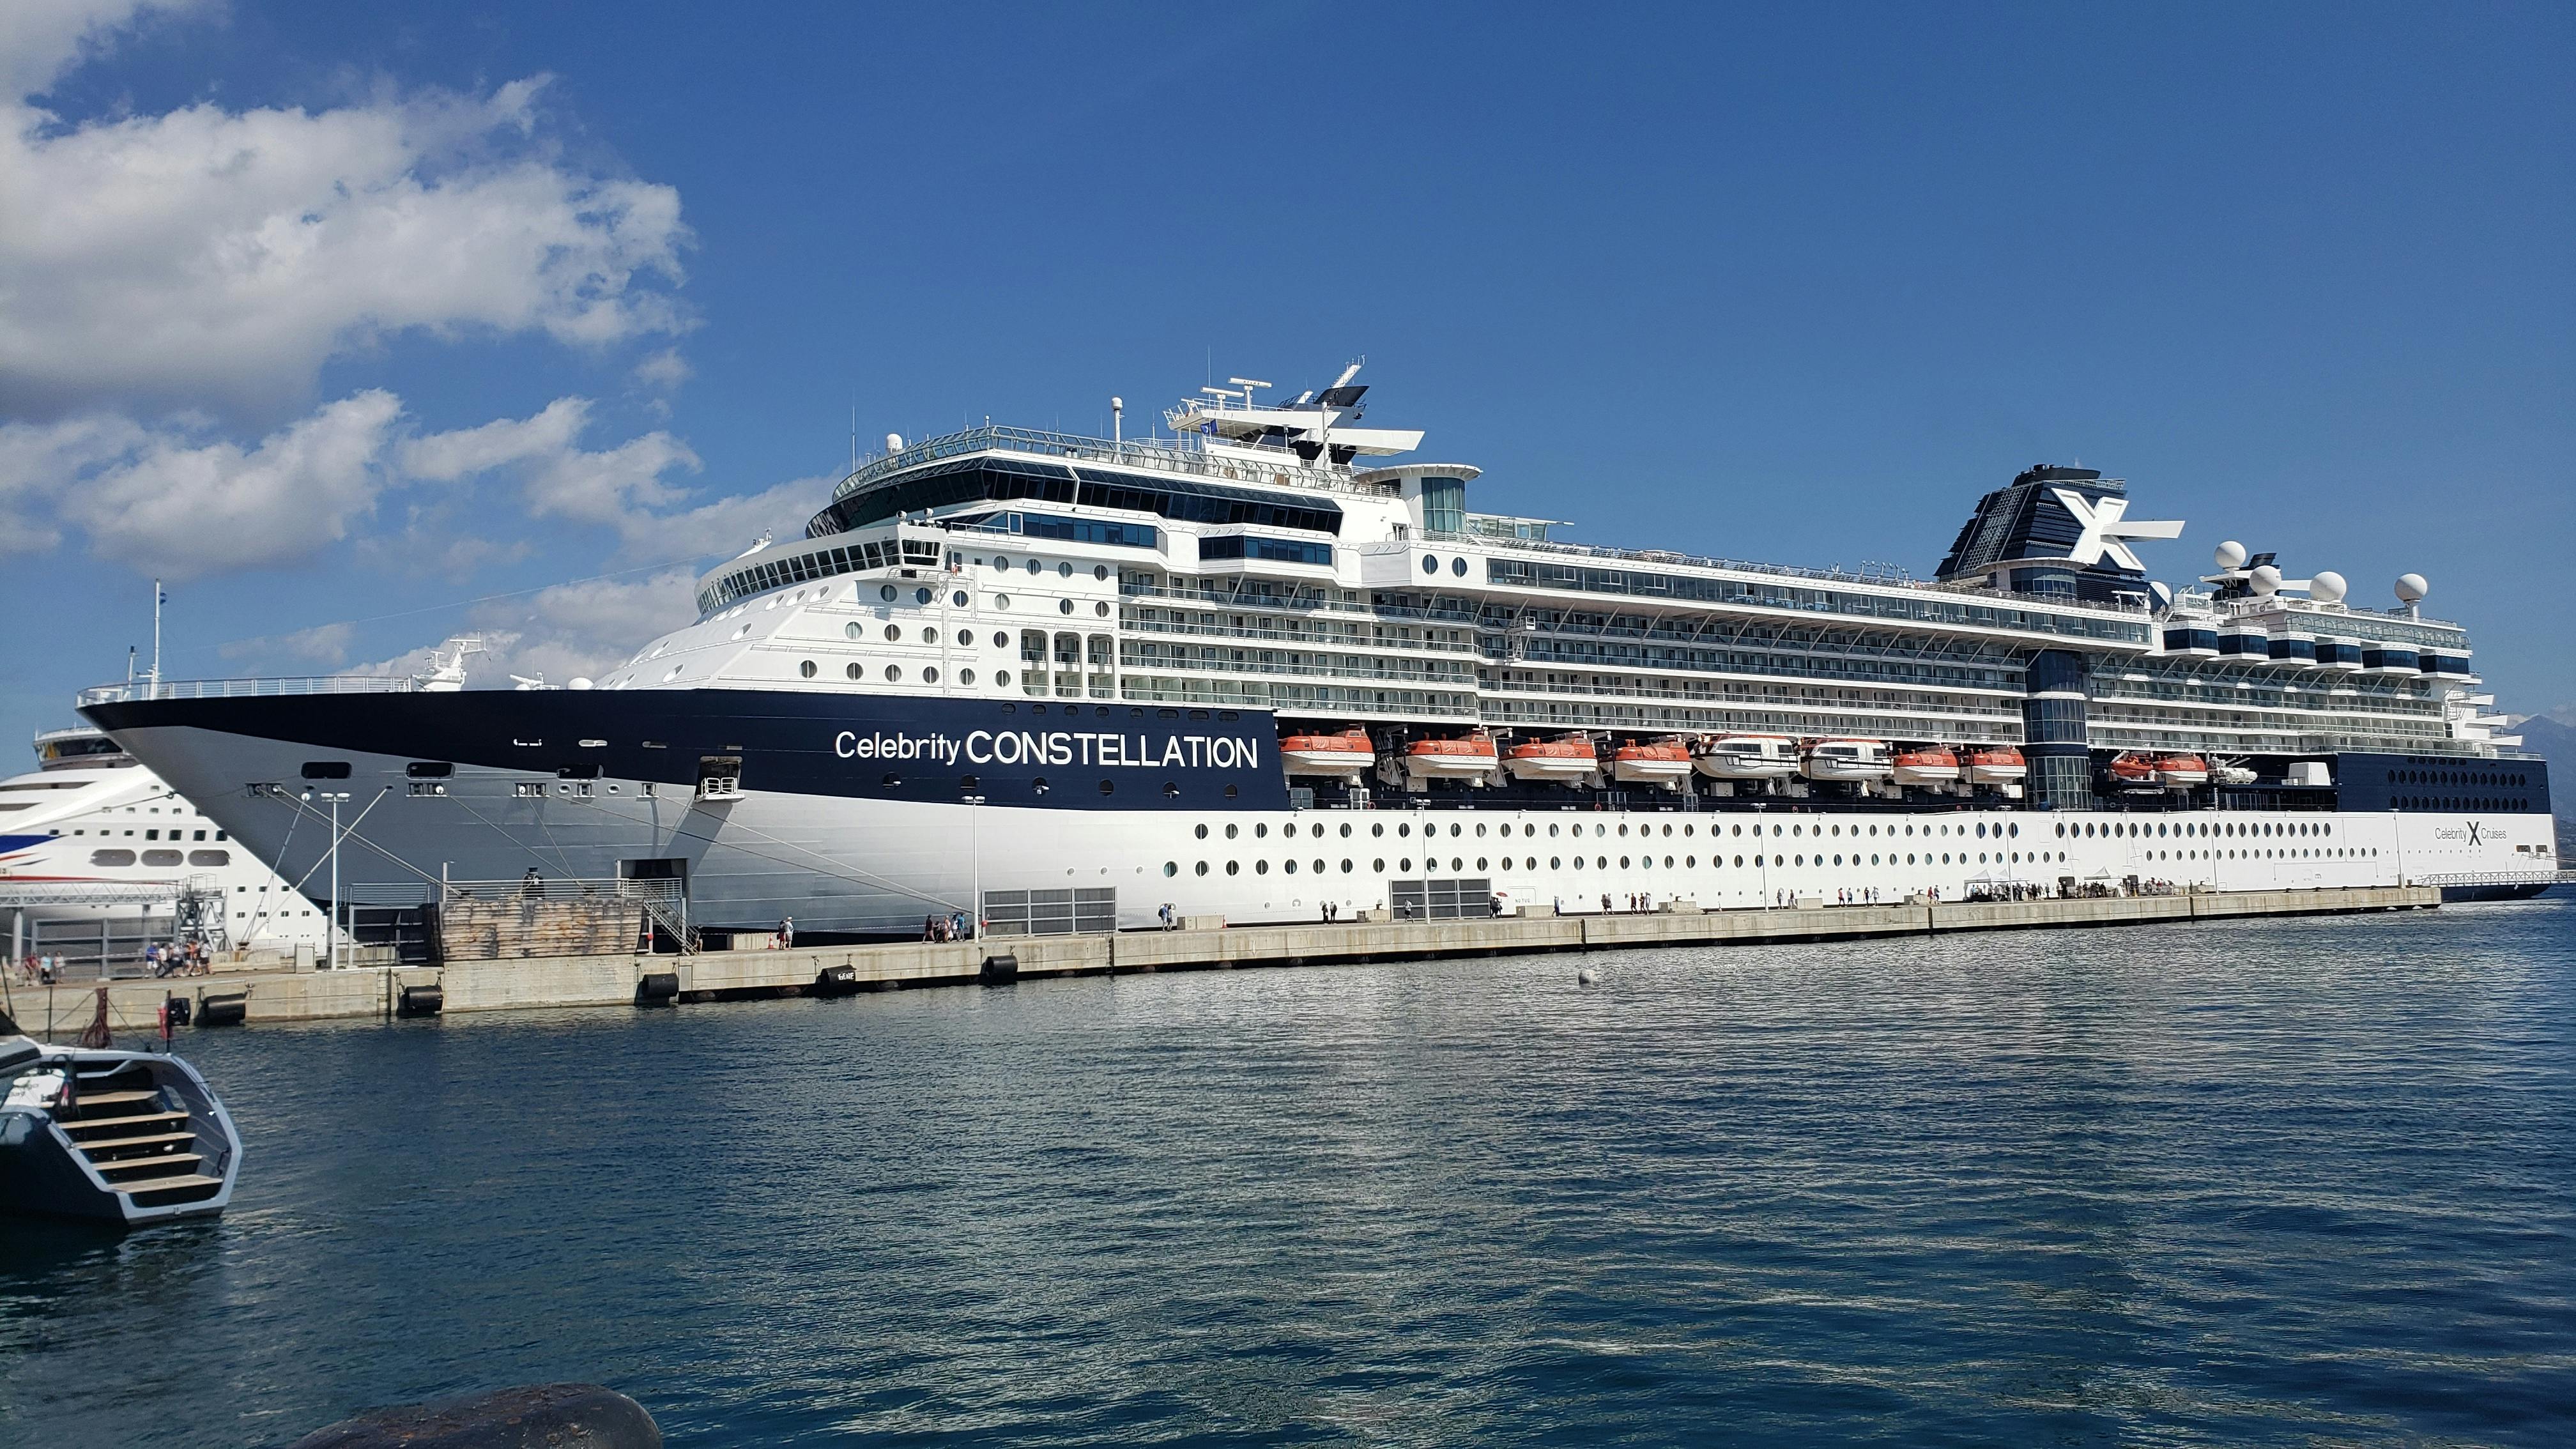 images of celebrity constellation cruise ship